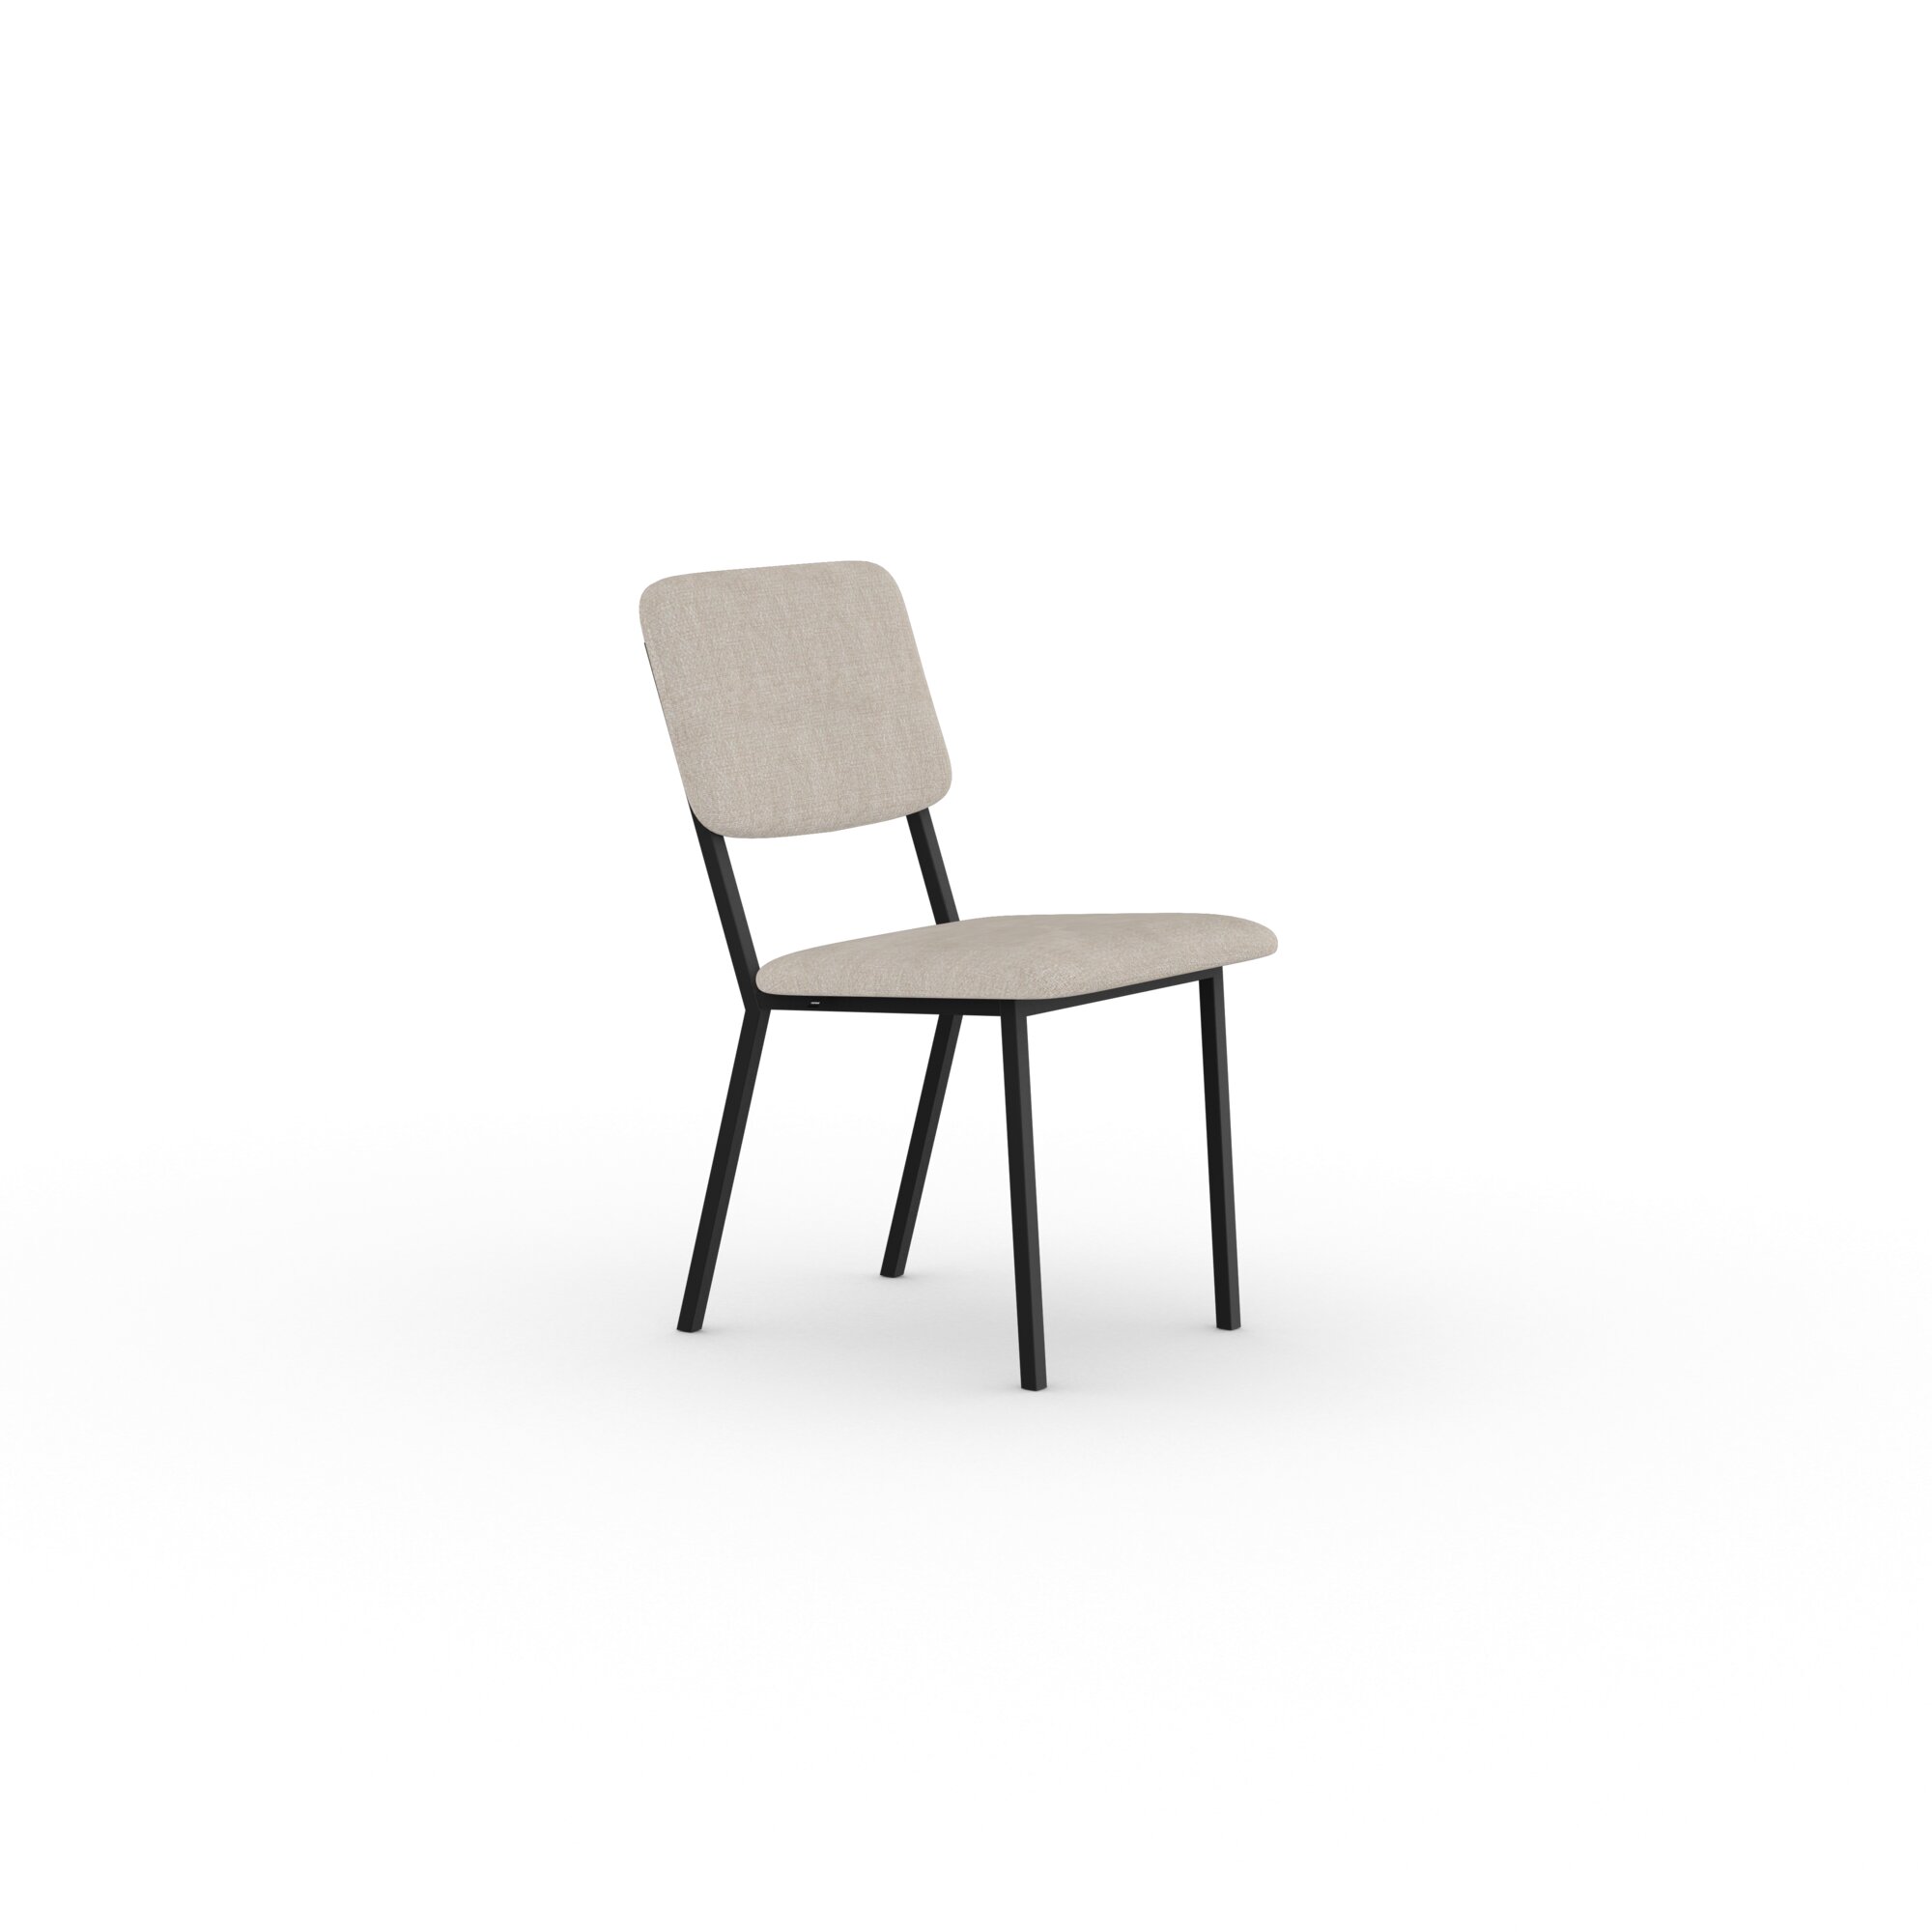 Design modern dining chair | Co Chair without armrest  orion shitake124 | Studio HENK| 